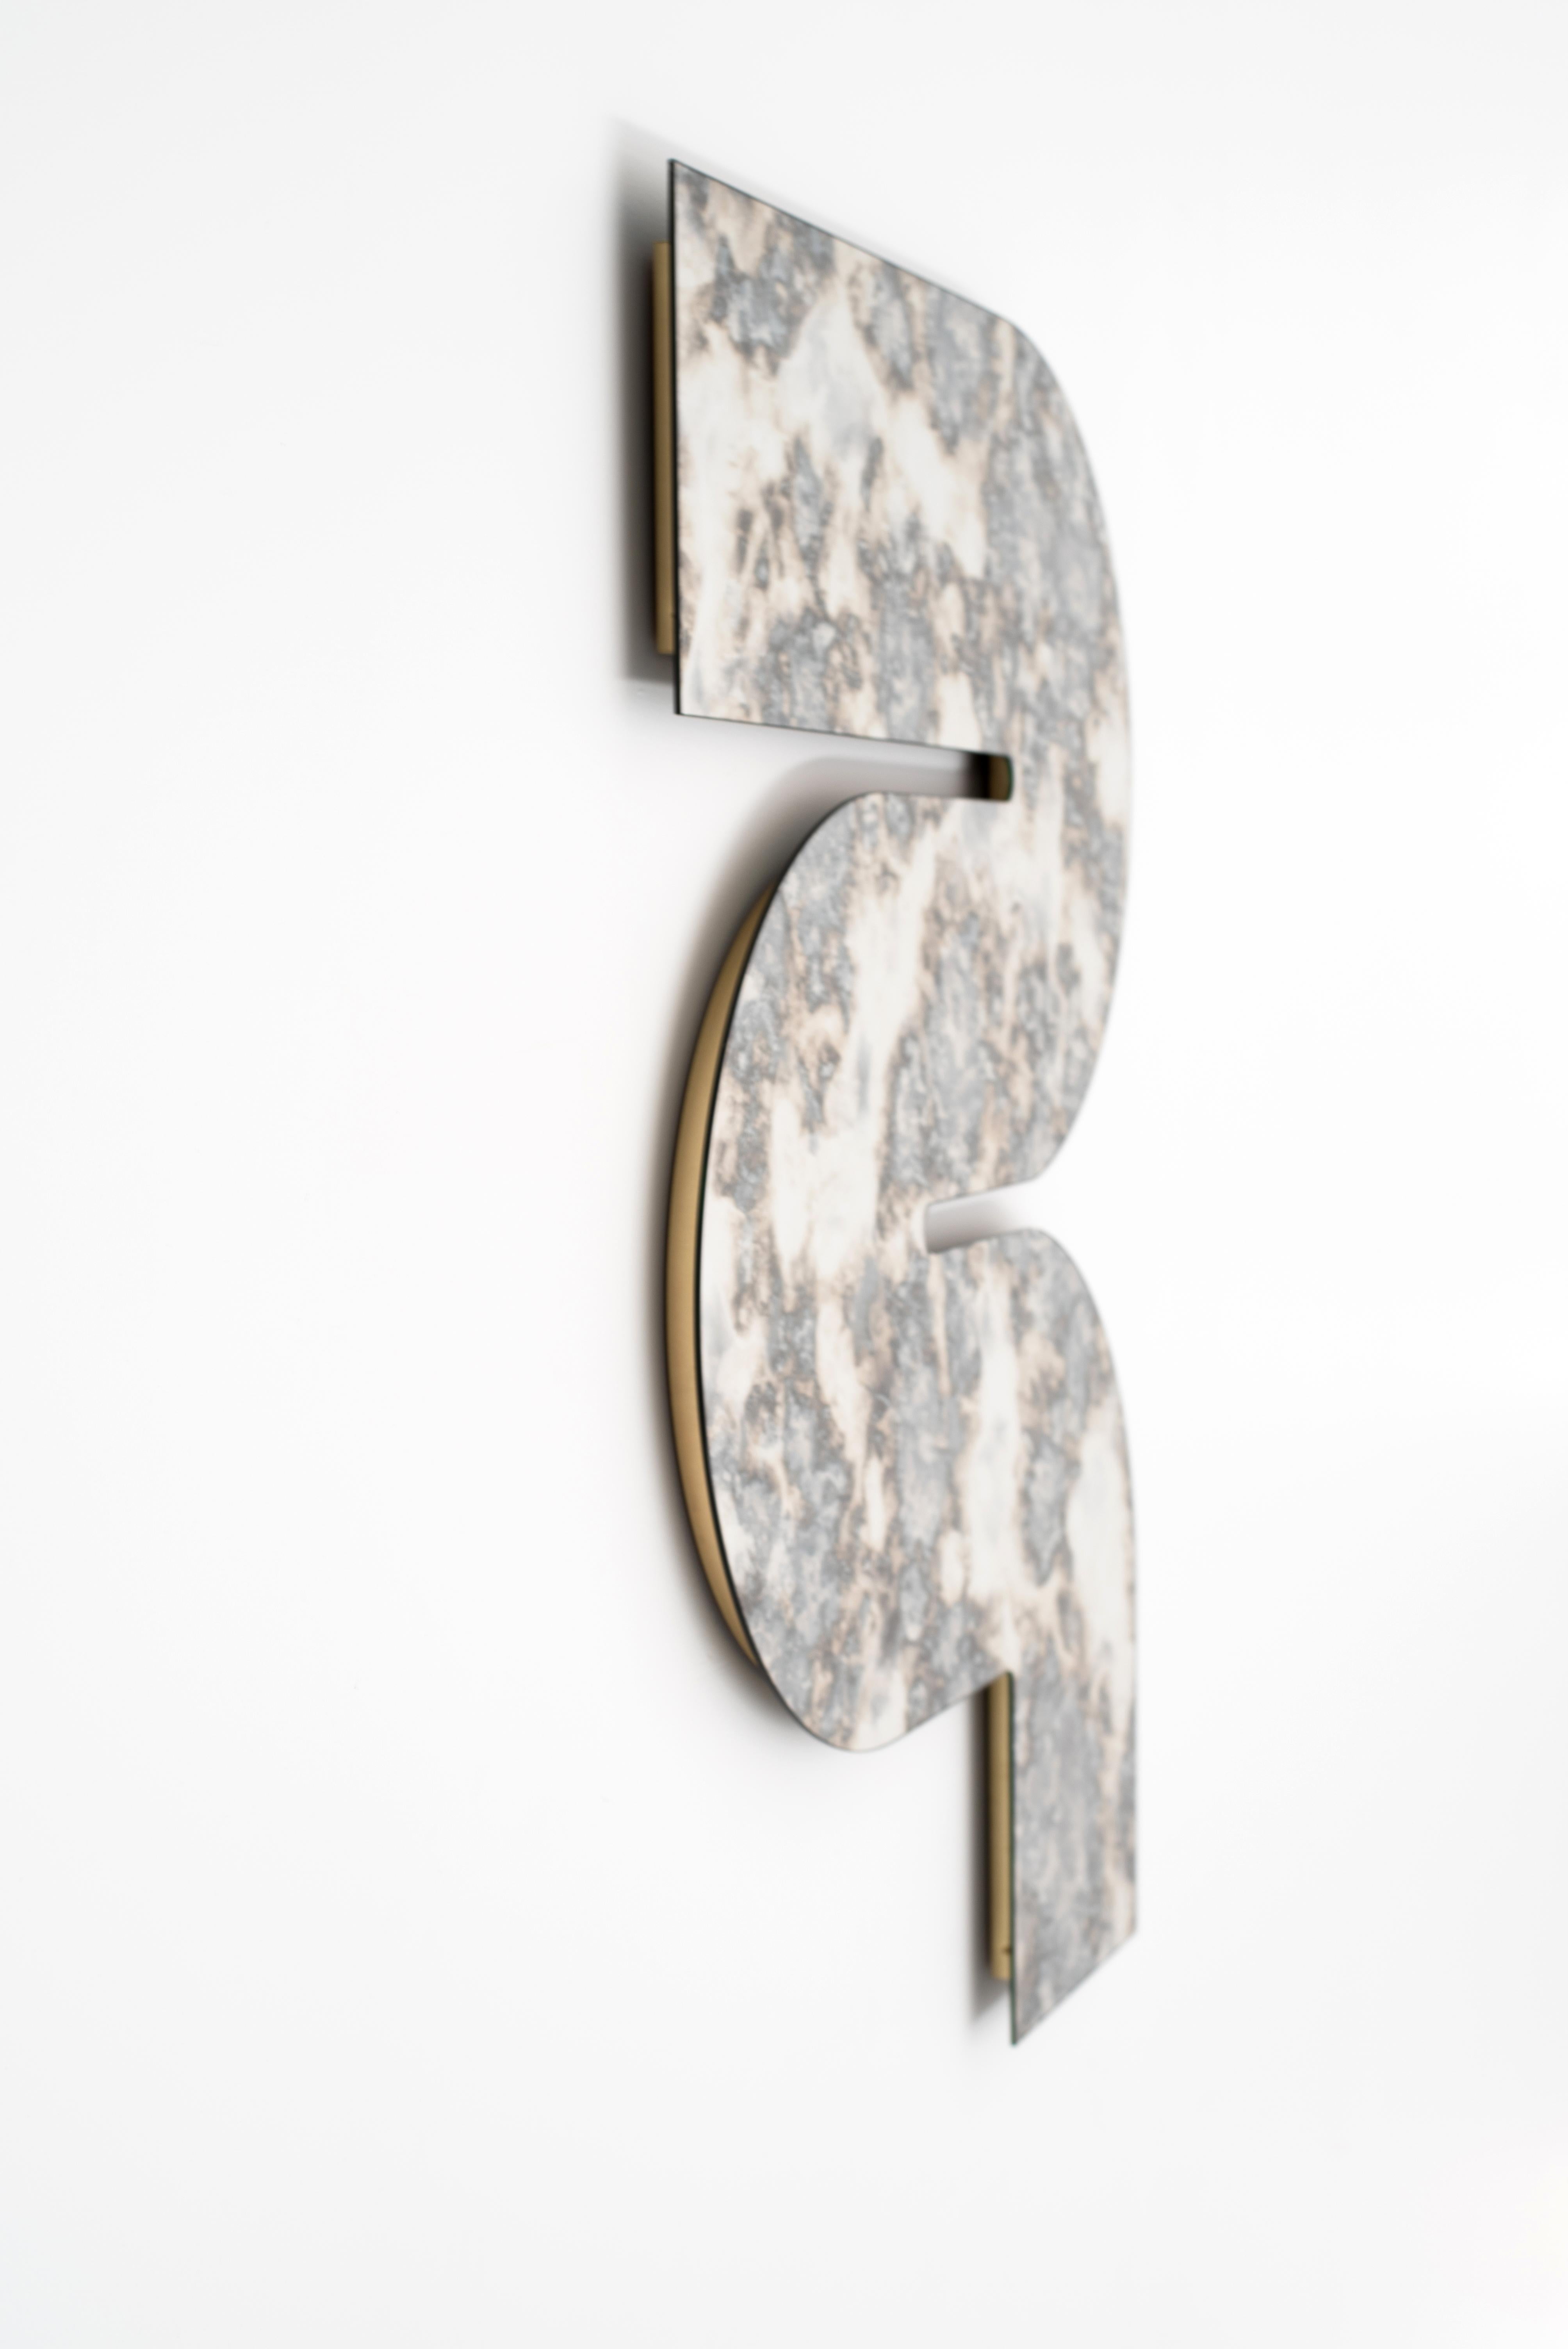 Brass Large Wall Mirror, Contemporary Antiqued Serpens Mirror by Ben & Aja Blanc For Sale